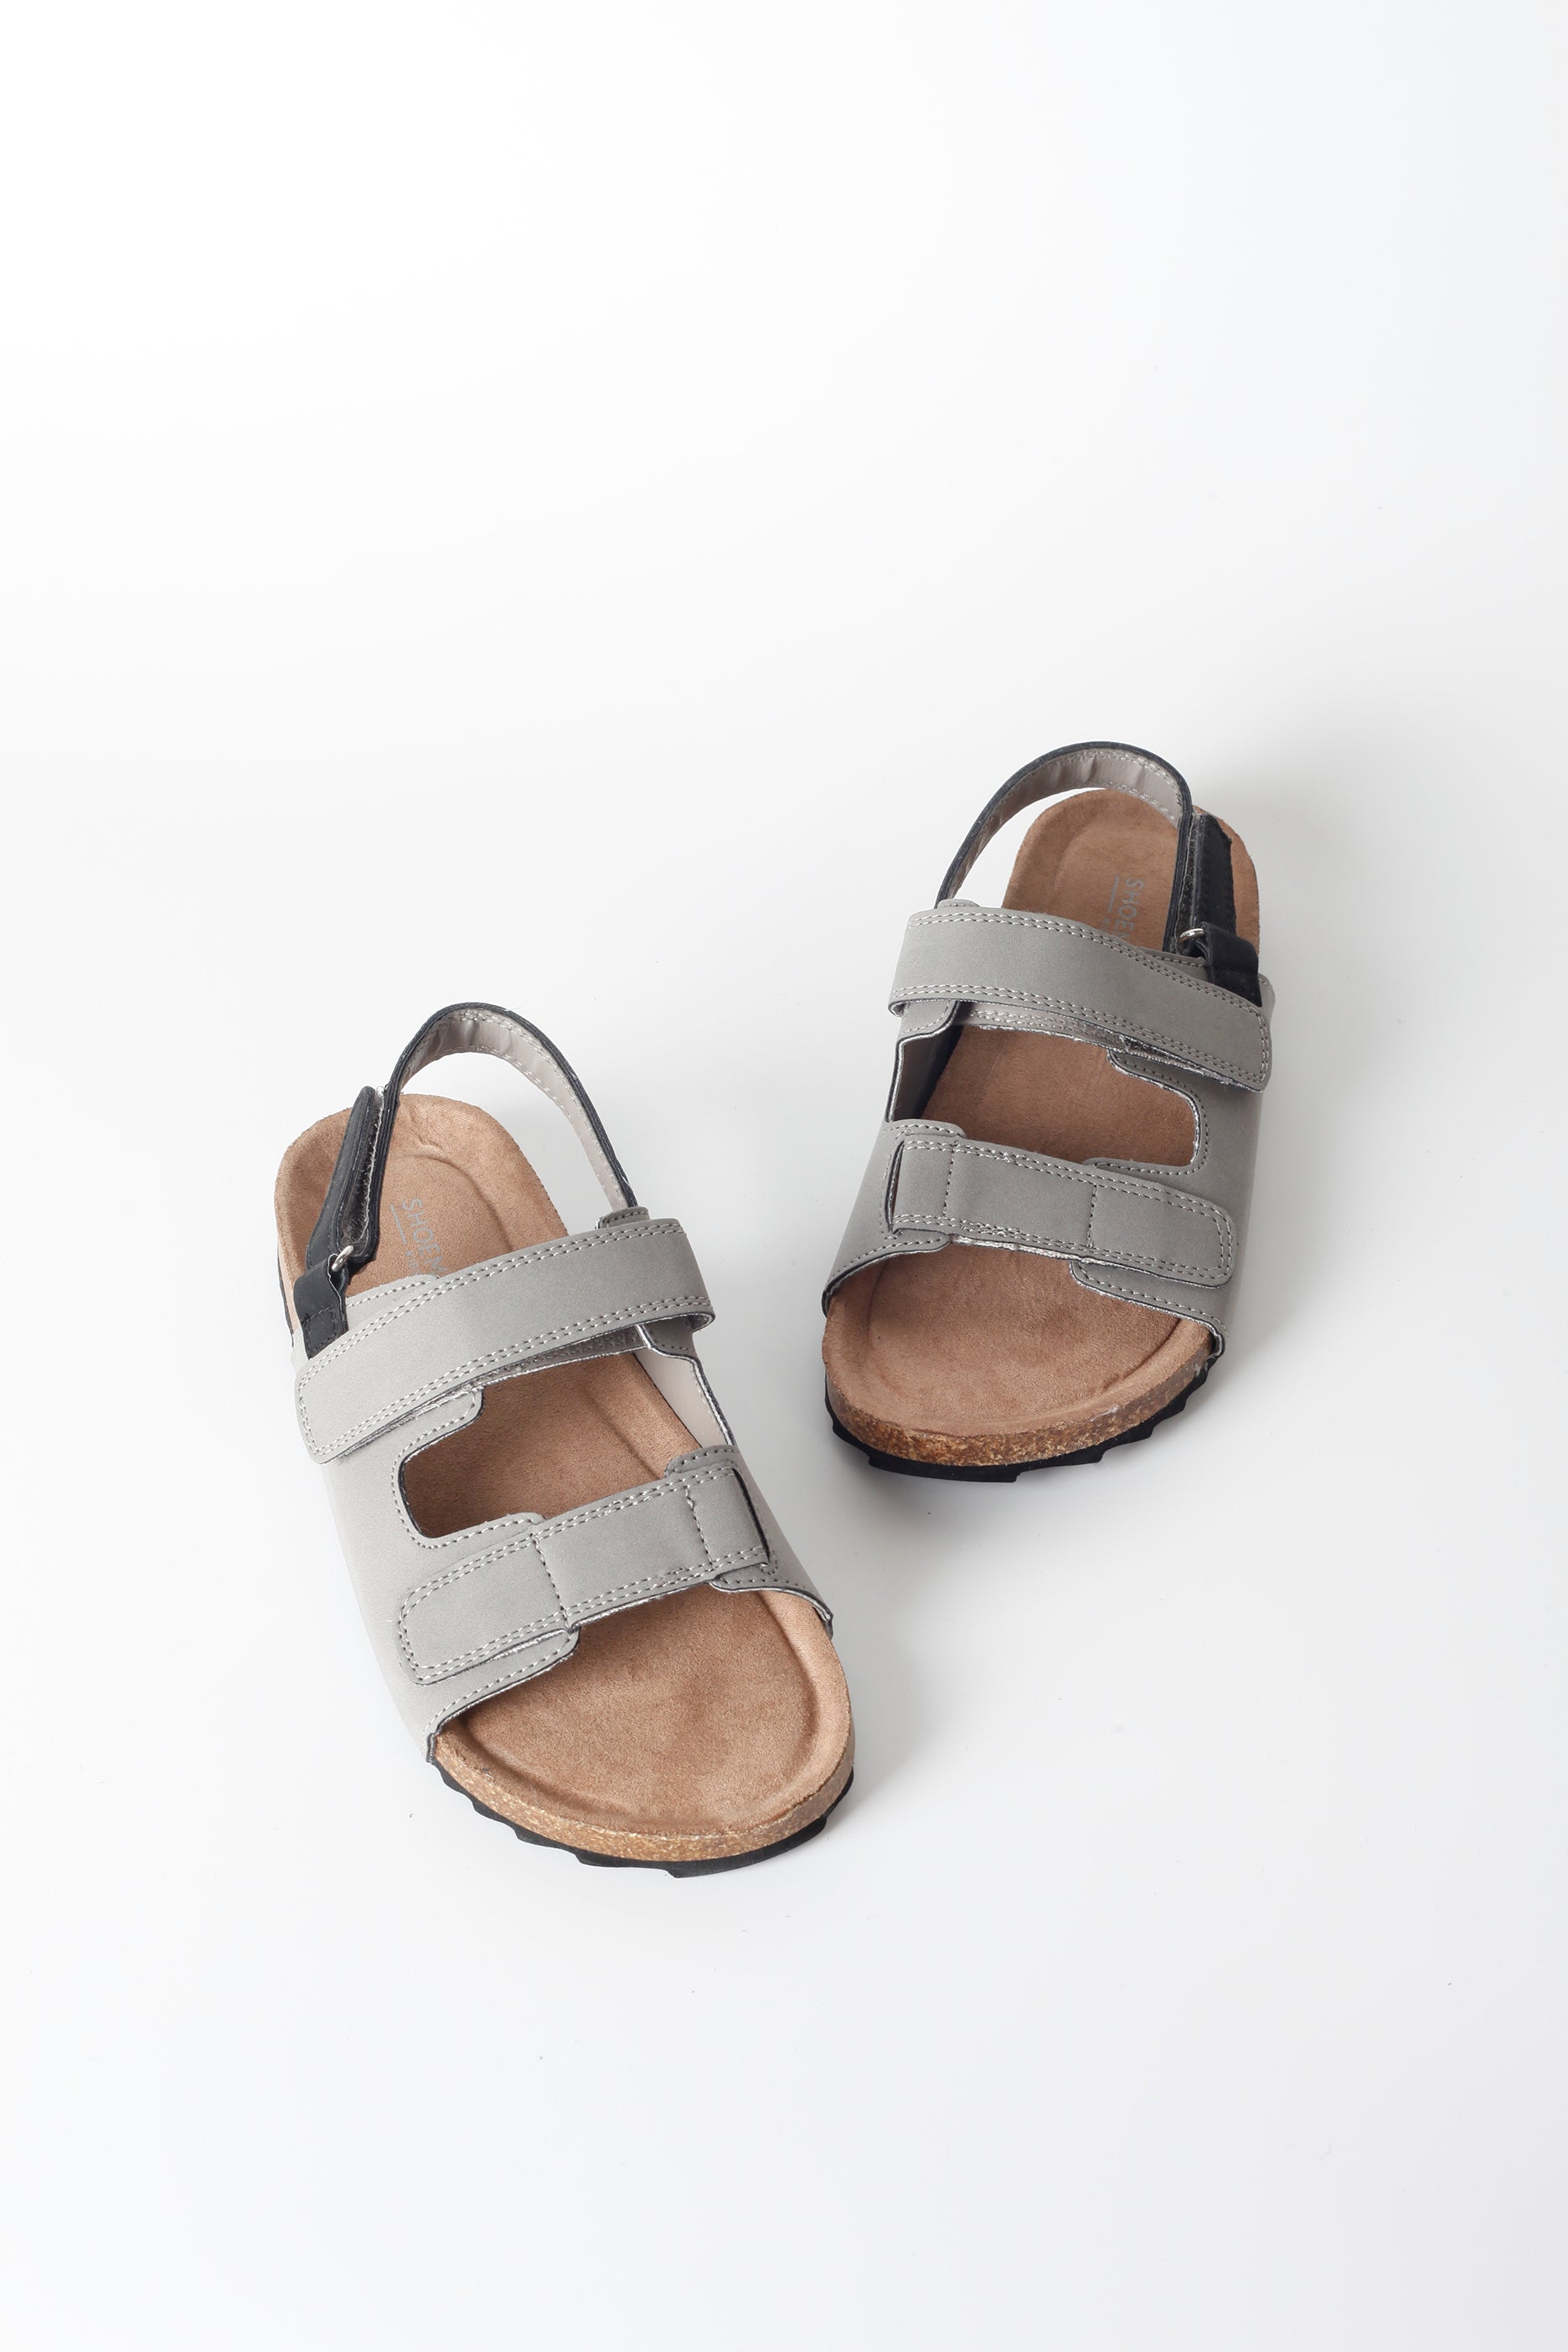 Kids Sandal with Strap